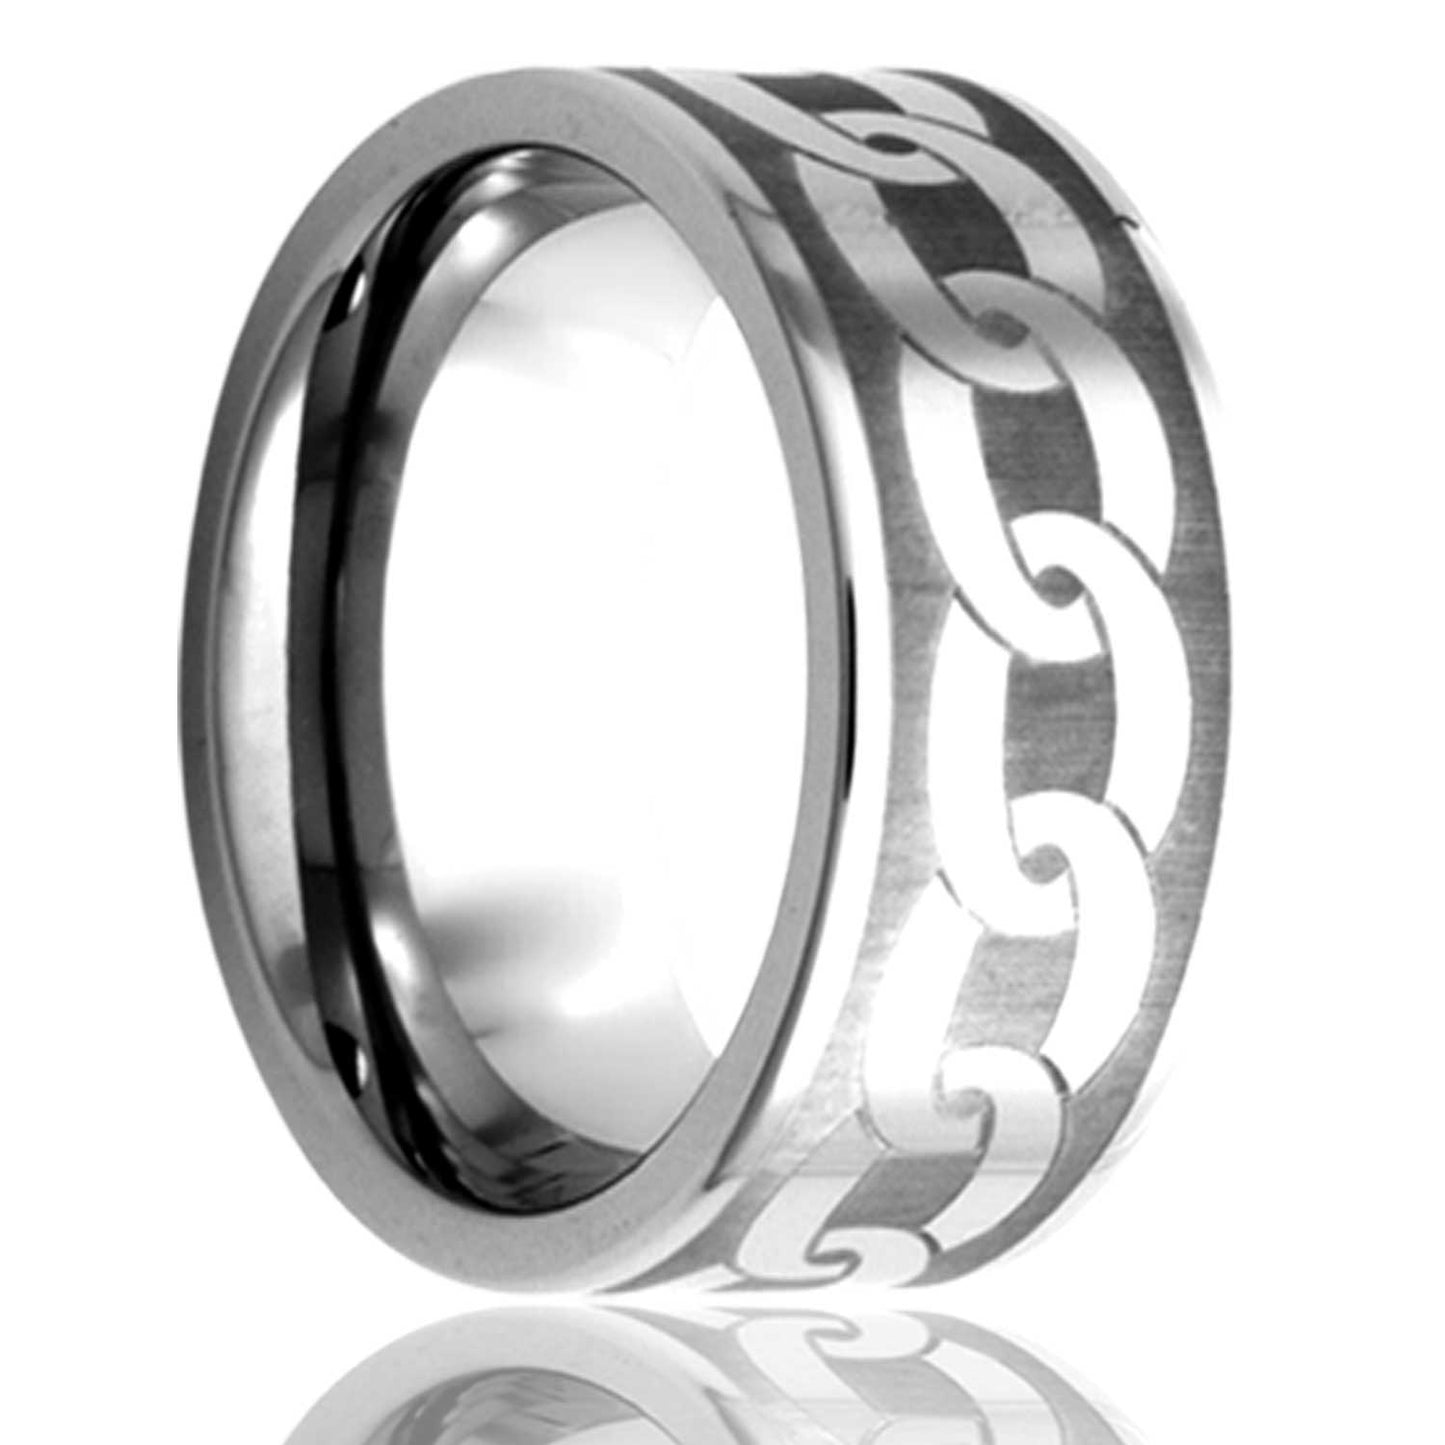 A chain pattern titanium wedding band displayed on a neutral white background.